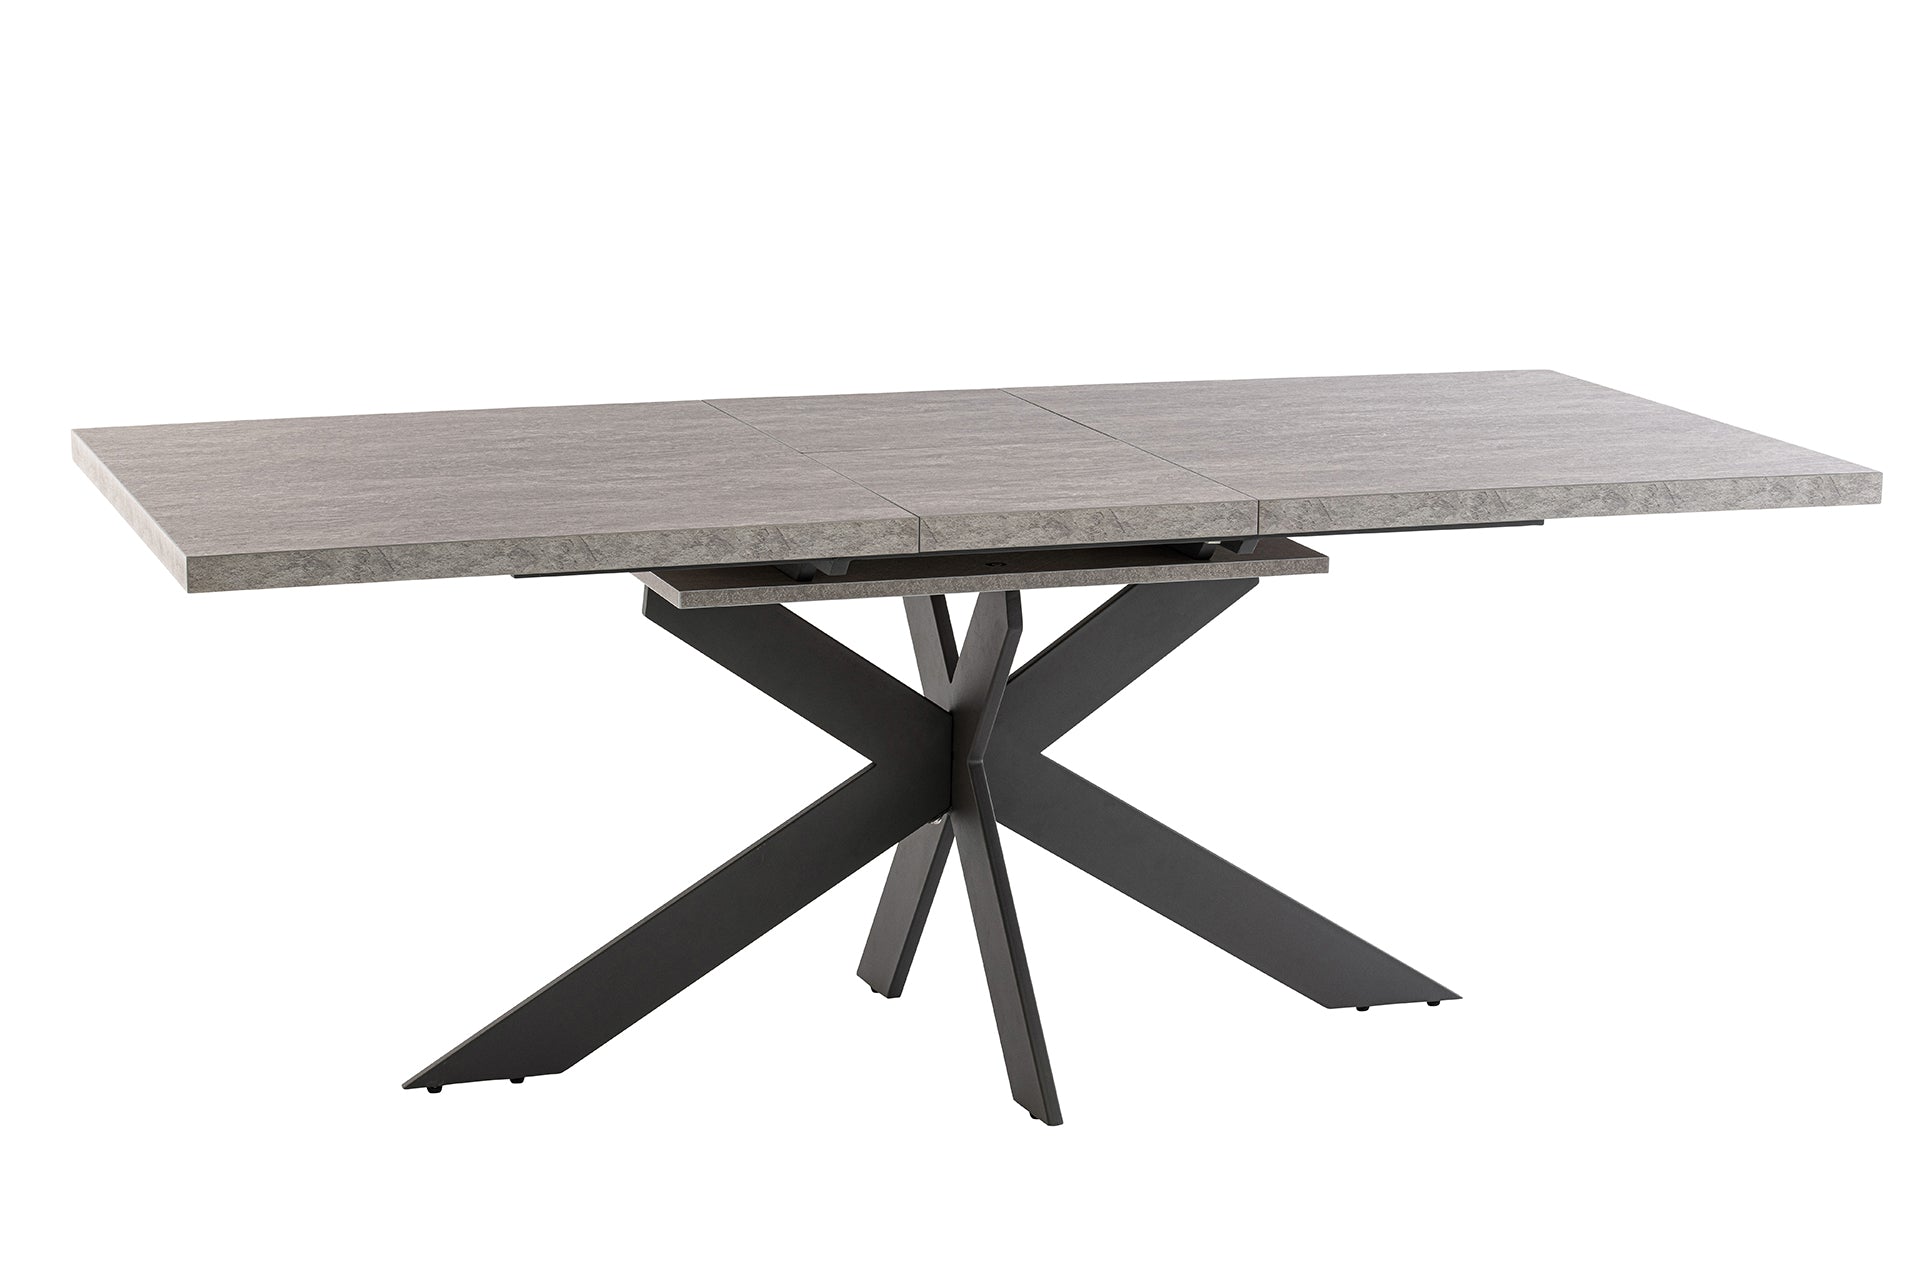 Rimbach 1.6m - 2.0m Extending Dining Table